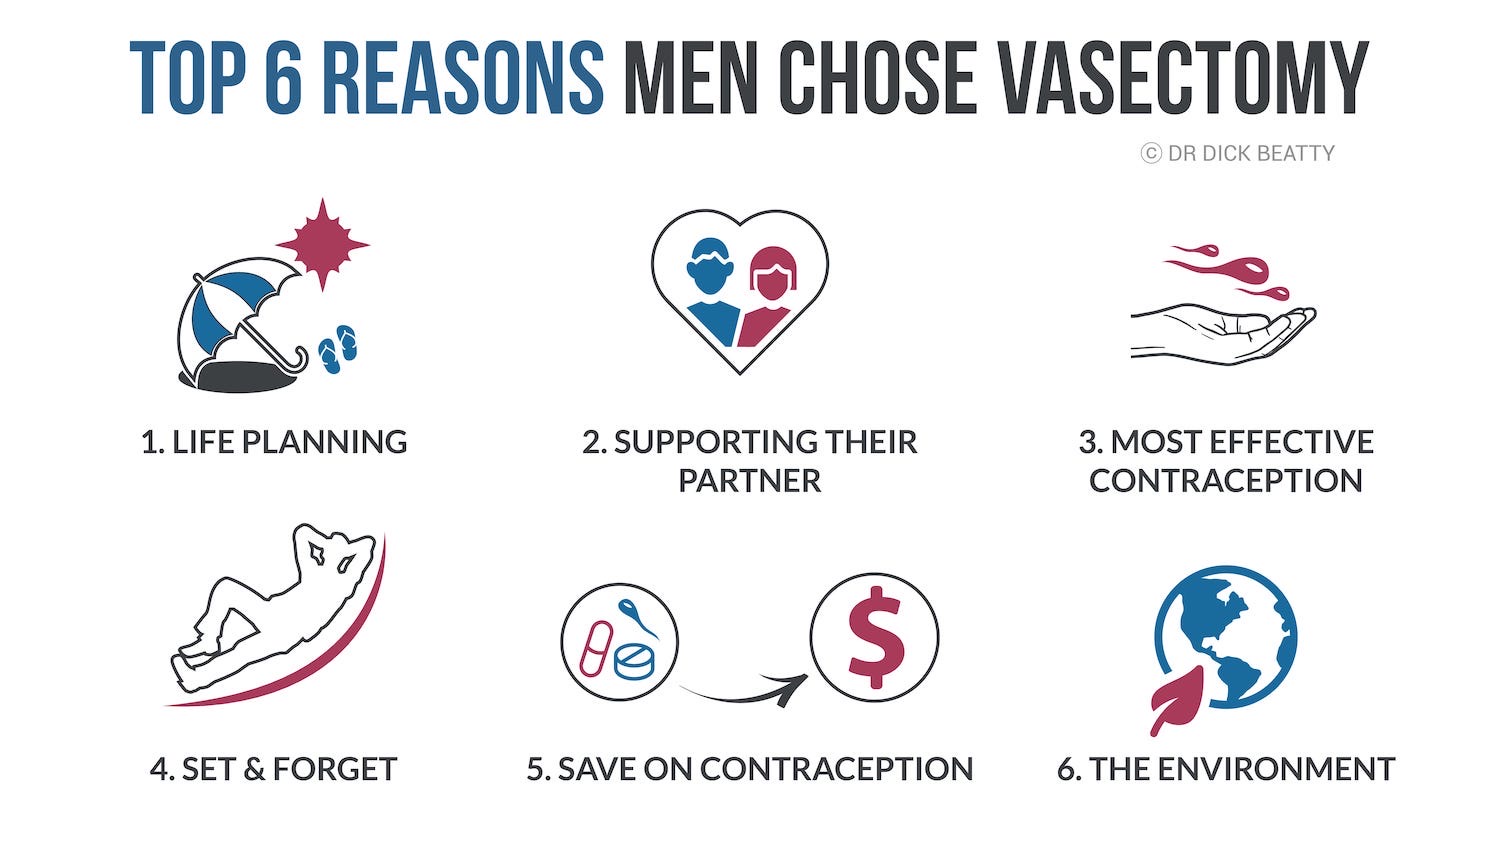 Infographic - why guys chose vasectomy: Top 6 reasons - desktop version